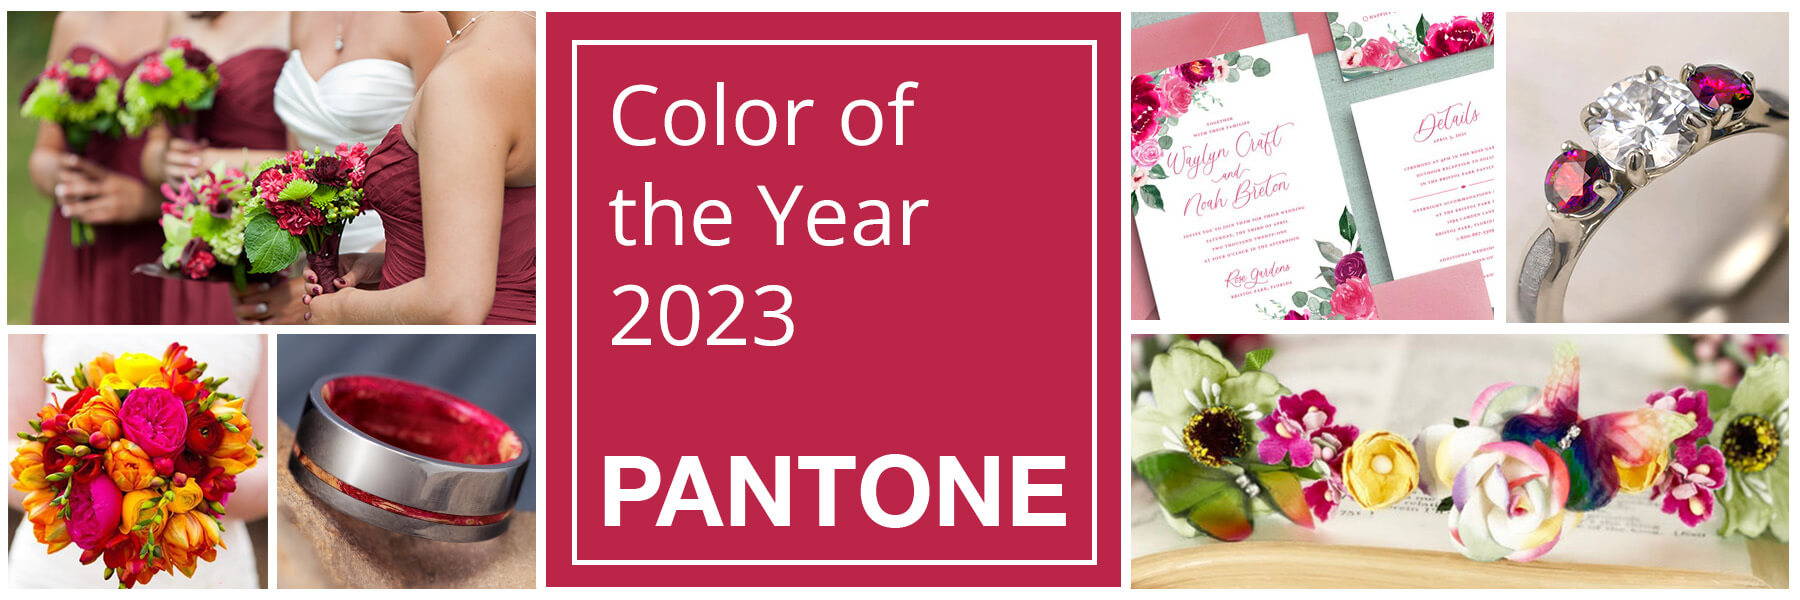 Pantone 2023 Color of the Year Wedding Inspiration